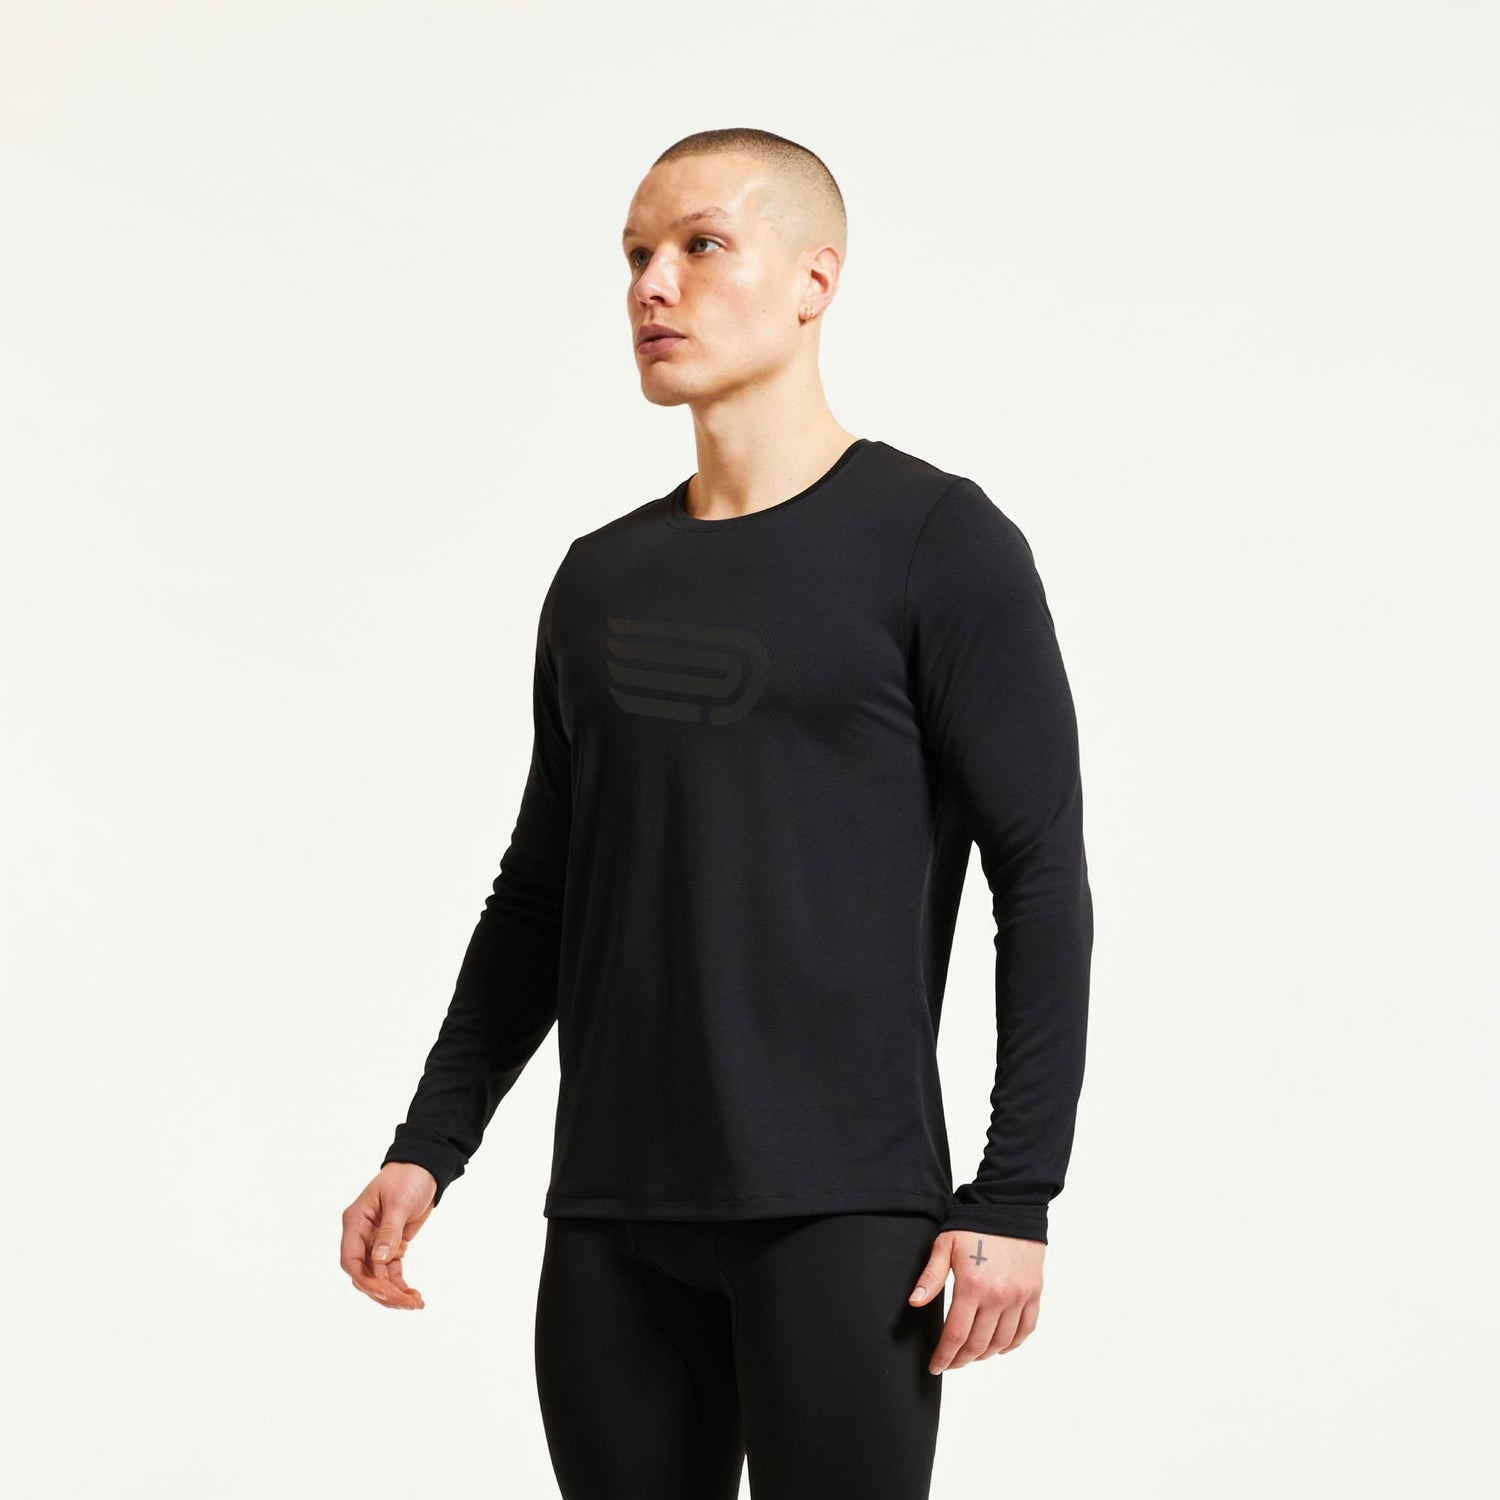 Pressio - M's Hāpai Long Sleeve Top - Recycled Polyester - Weekendbee - sustainable sportswear